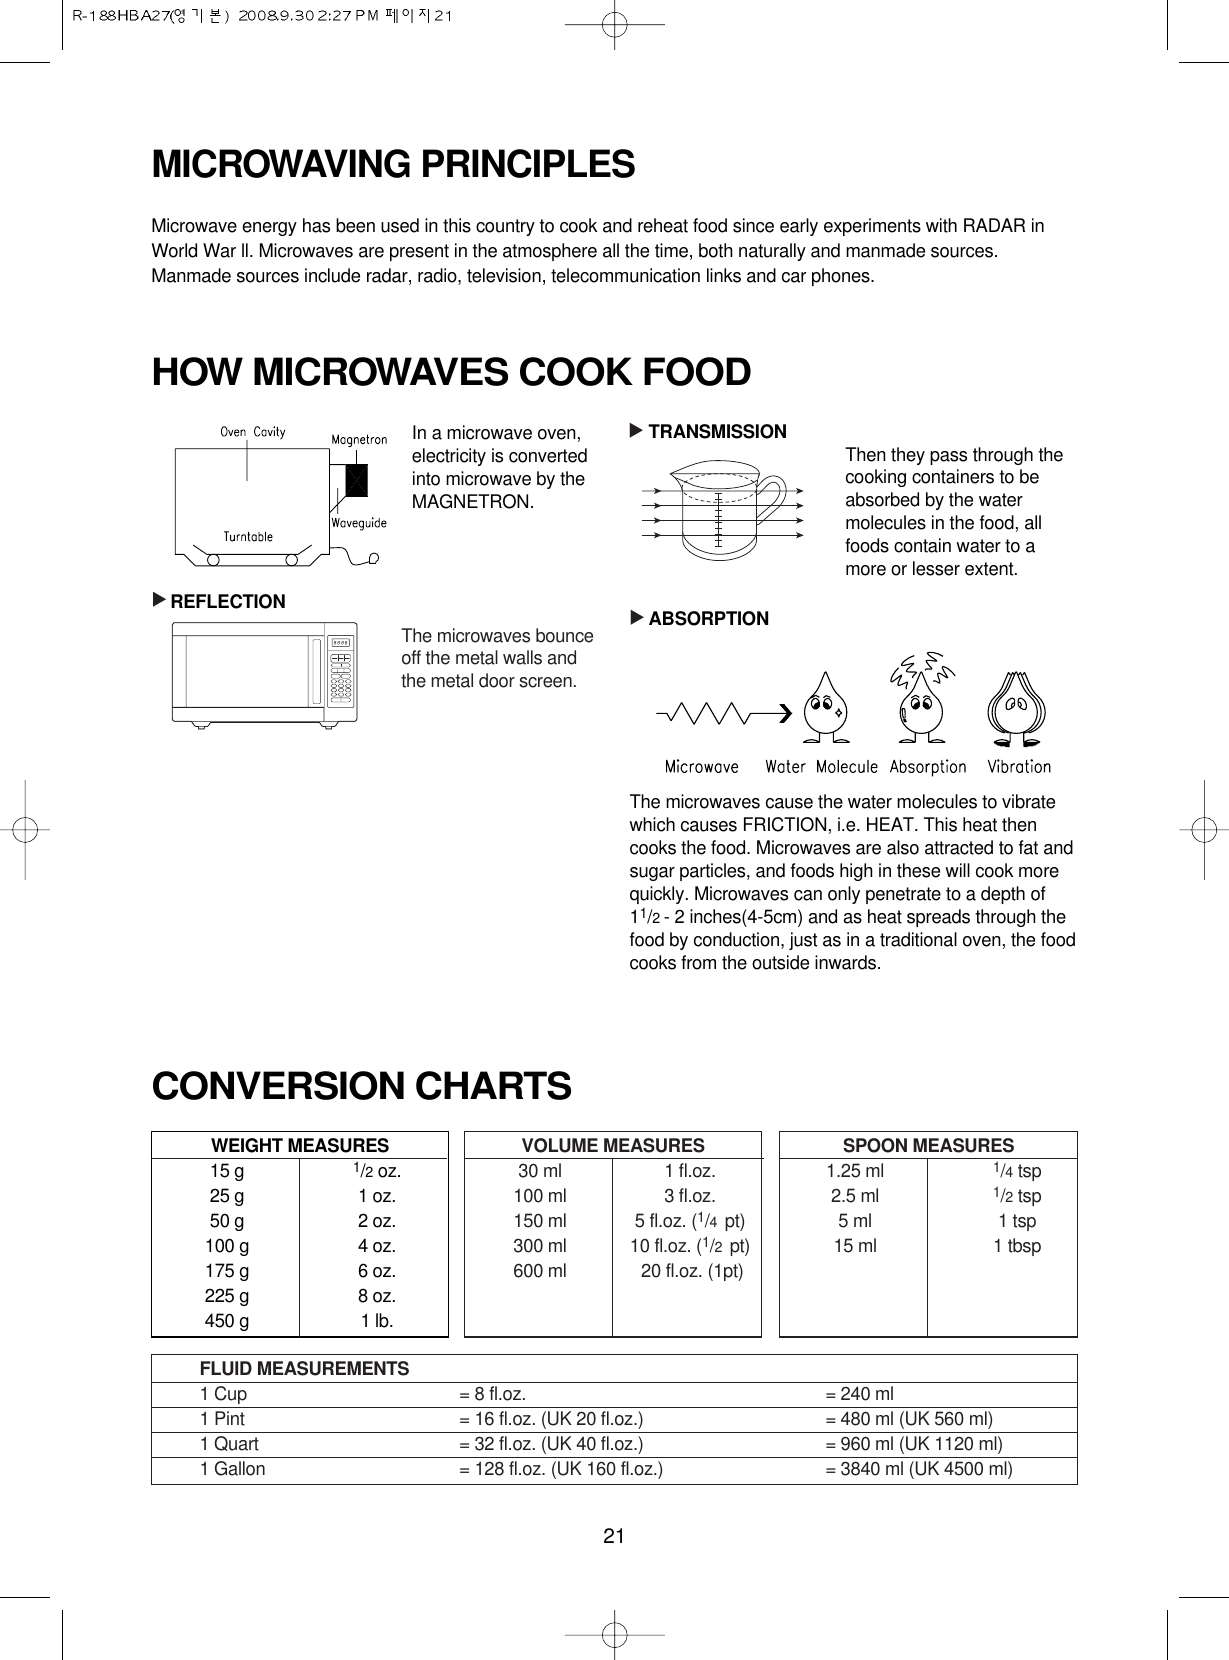 21MICROWAVING PRINCIPLESMicrowave energy has been used in this country to cook and reheat food since early experiments with RADAR inWorld War ll. Microwaves are present in the atmosphere all the time, both naturally and manmade sources.Manmade sources include radar, radio, television, telecommunication links and car phones.CONVERSION CHARTSIn a microwave oven,electricity is convertedinto microwave by theMAGNETRON.REFLECTIONTRANSMISSION Then they pass through thecooking containers to beabsorbed by the watermolecules in the food, allfoods contain water to amore or lesser extent.ABSORPTIONThe microwaves cause the water molecules to vibratewhich causes FRICTION, i.e. HEAT. This heat thencooks the food. Microwaves are also attracted to fat andsugar particles, and foods high in these will cook morequickly. Microwaves can only penetrate to a depth of11/2 - 2 inches(4-5cm) and as heat spreads through thefood by conduction, just as in a traditional oven, the foodcooks from the outside inwards.WEIGHT MEASURES15 g 1/2oz.25 g 1 oz.50 g 2 oz.100 g 4 oz.175 g 6 oz.225 g 8 oz.450 g 1 lb.HOW MICROWAVES COOK FOOD▲▲▲VOLUME MEASURES30 ml 1 fl.oz.100 ml 3 fl.oz.150 ml 5 fl.oz. (1/4  pt)300 ml 10 fl.oz. (1/2  pt)600 ml 20 fl.oz. (1pt)SPOON MEASURES1.25 ml 1/4tsp2.5 ml 1/2tsp5 ml 1 tsp15 ml 1 tbspFLUID MEASUREMENTS1 Cup = 8 fl.oz. = 240 ml1 Pint = 16 fl.oz. (UK 20 fl.oz.) = 480 ml (UK 560 ml)1 Quart = 32 fl.oz. (UK 40 fl.oz.) = 960 ml (UK 1120 ml)1 Gallon = 128 fl.oz. (UK 160 fl.oz.) = 3840 ml (UK 4500 ml)The microwaves bounceoff the metal walls andthe metal door screen.